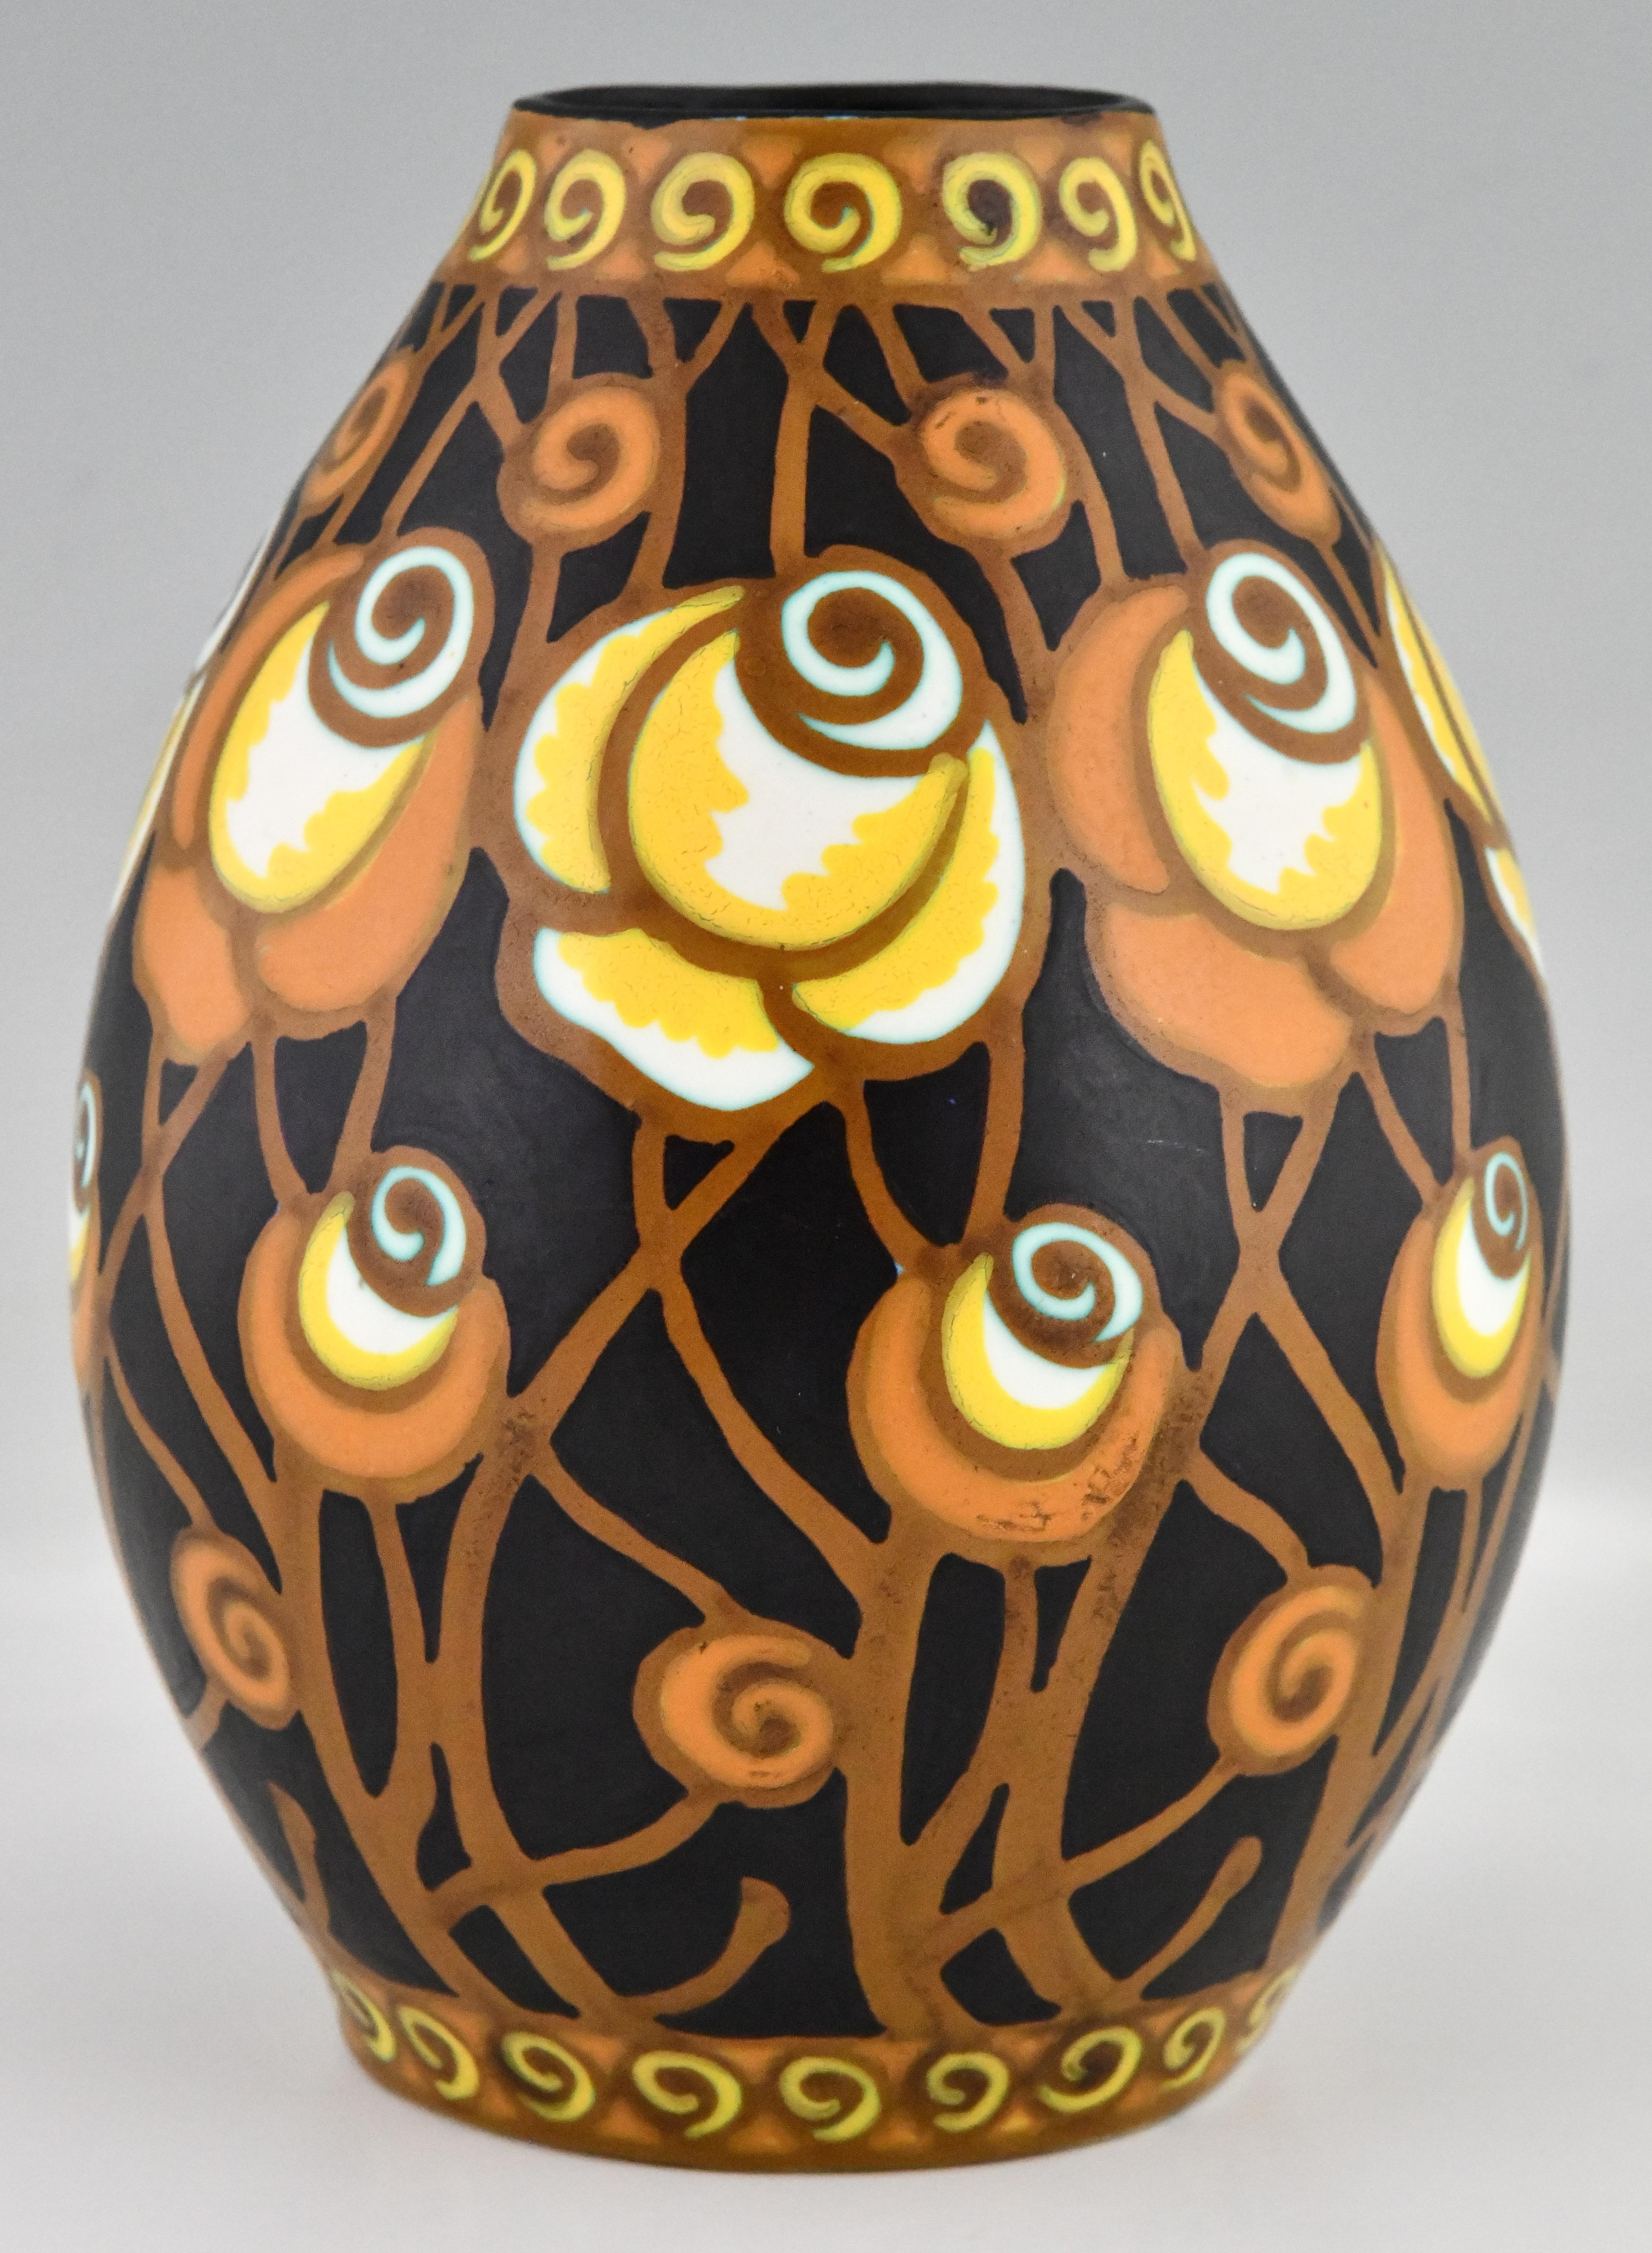 Art Deco ceramic vase with stylized flowers. Designed for the Atelier de Fantaisie by Charles Catteau. Boch Frères, Belgium 1925. Matt enamels on earthenware. Polychrome design with stylized floral motifs. Black, yellow, orange, brown, white. This